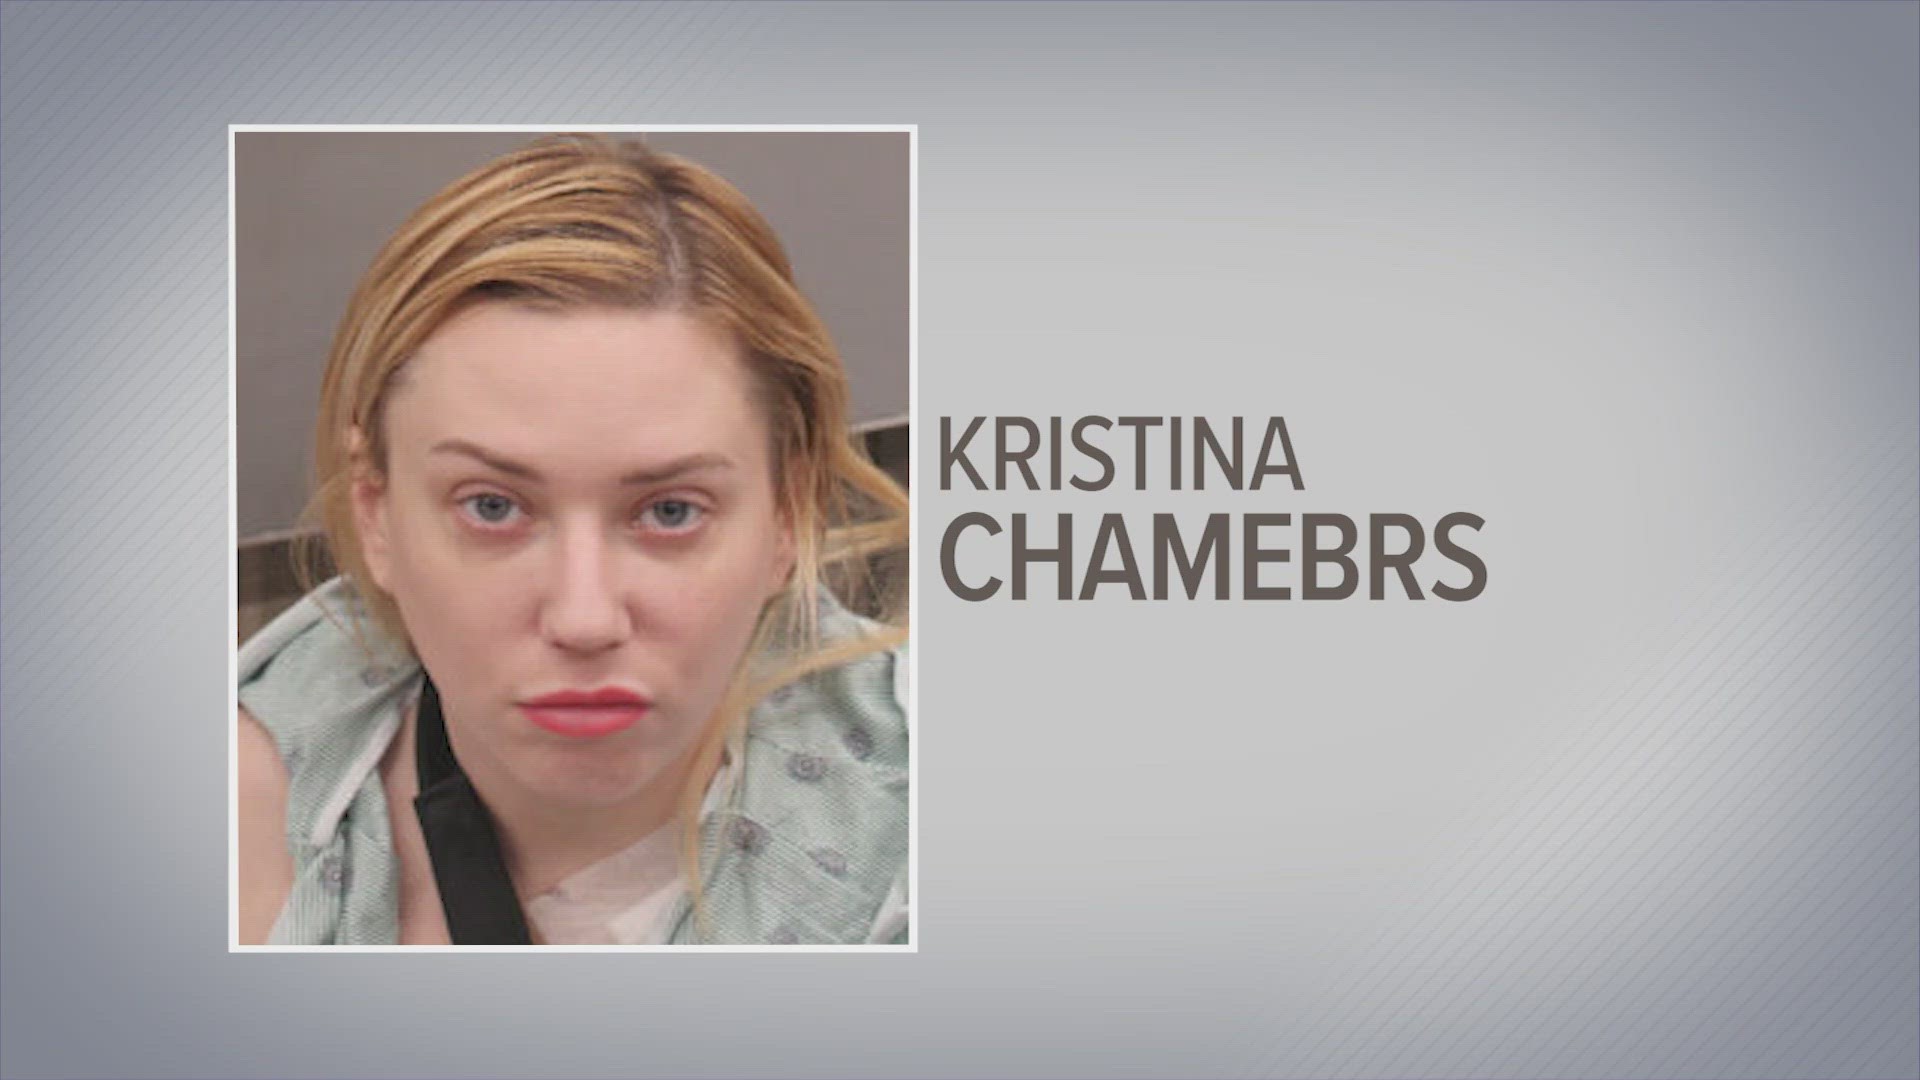 Kristina Chambers was seen in a hospital gown in her mugshot because she was just released from the hospital and then booked into the Harris County Jail.